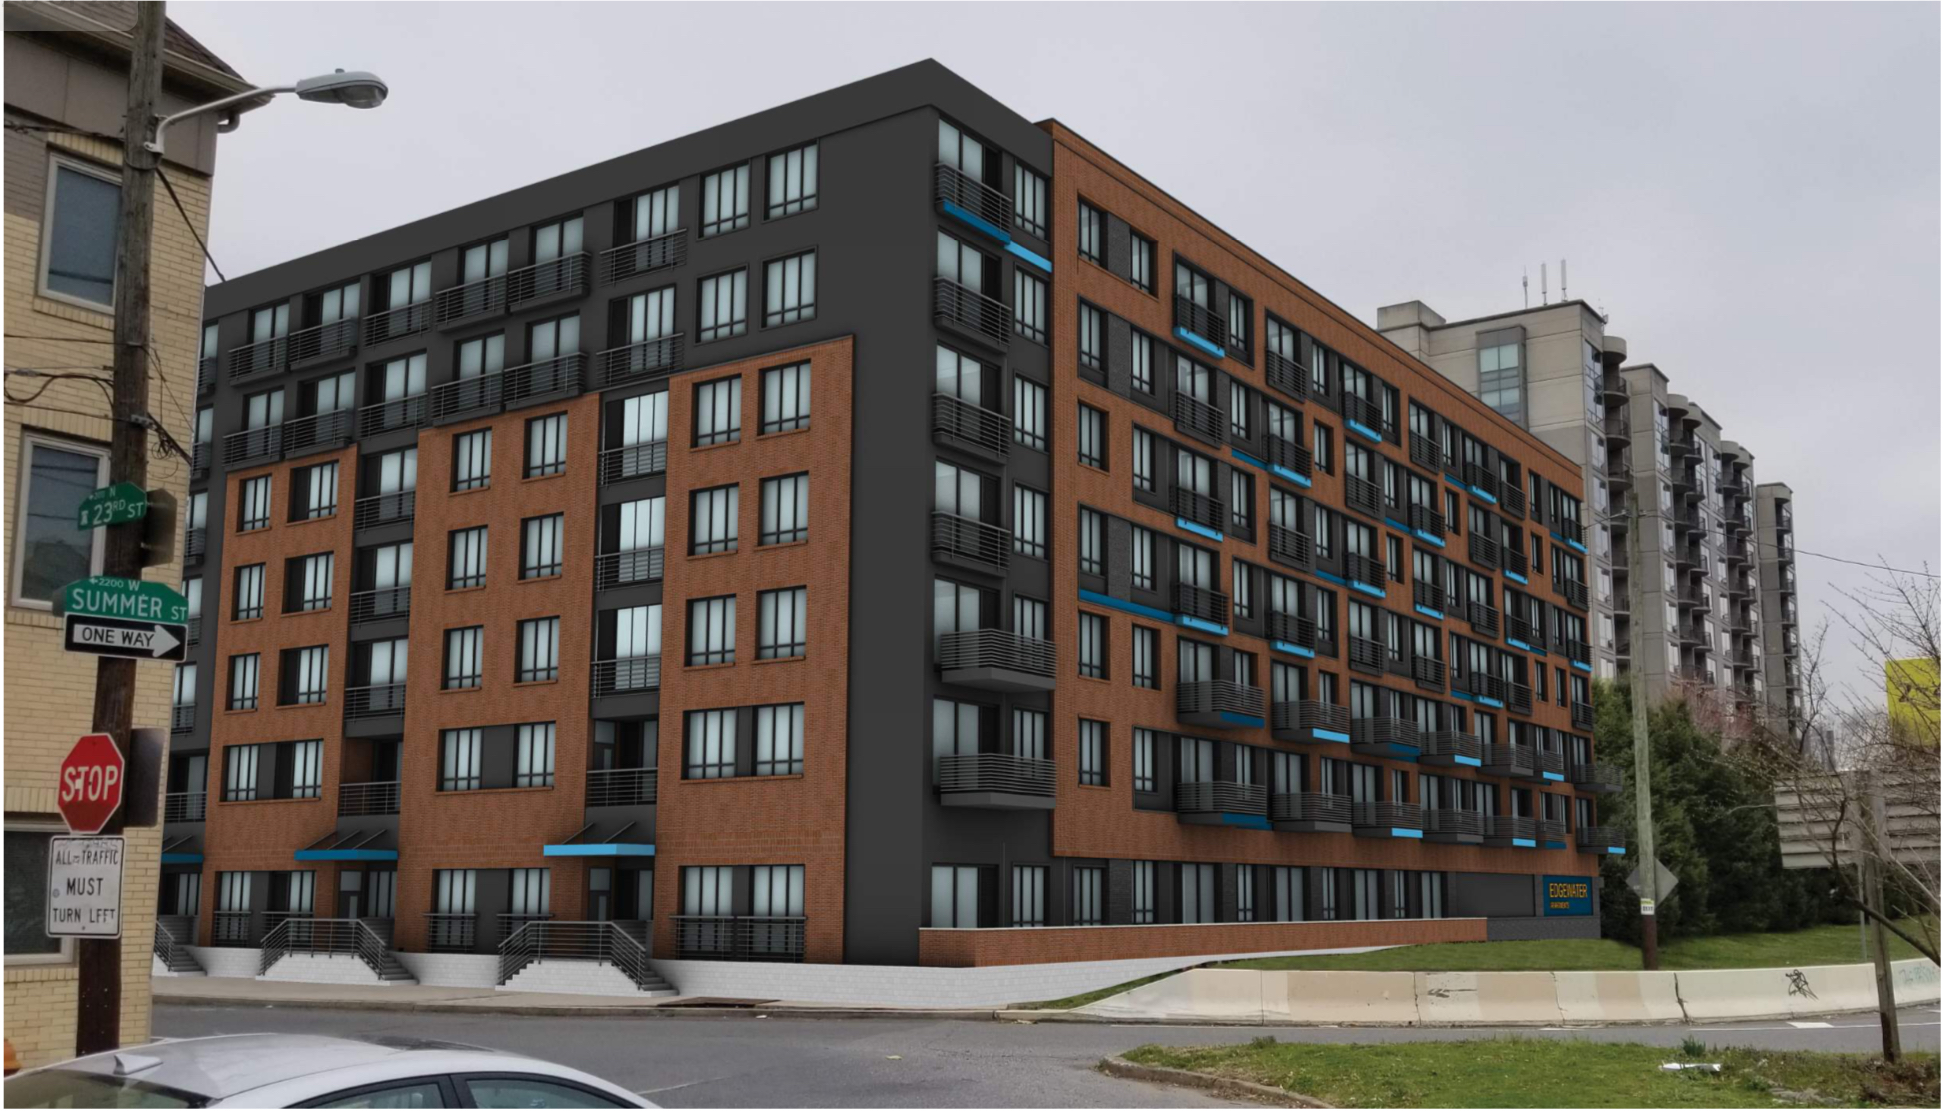 Edgewater Apartments at 230 North 23rd Street. Credit: JKRP Architects